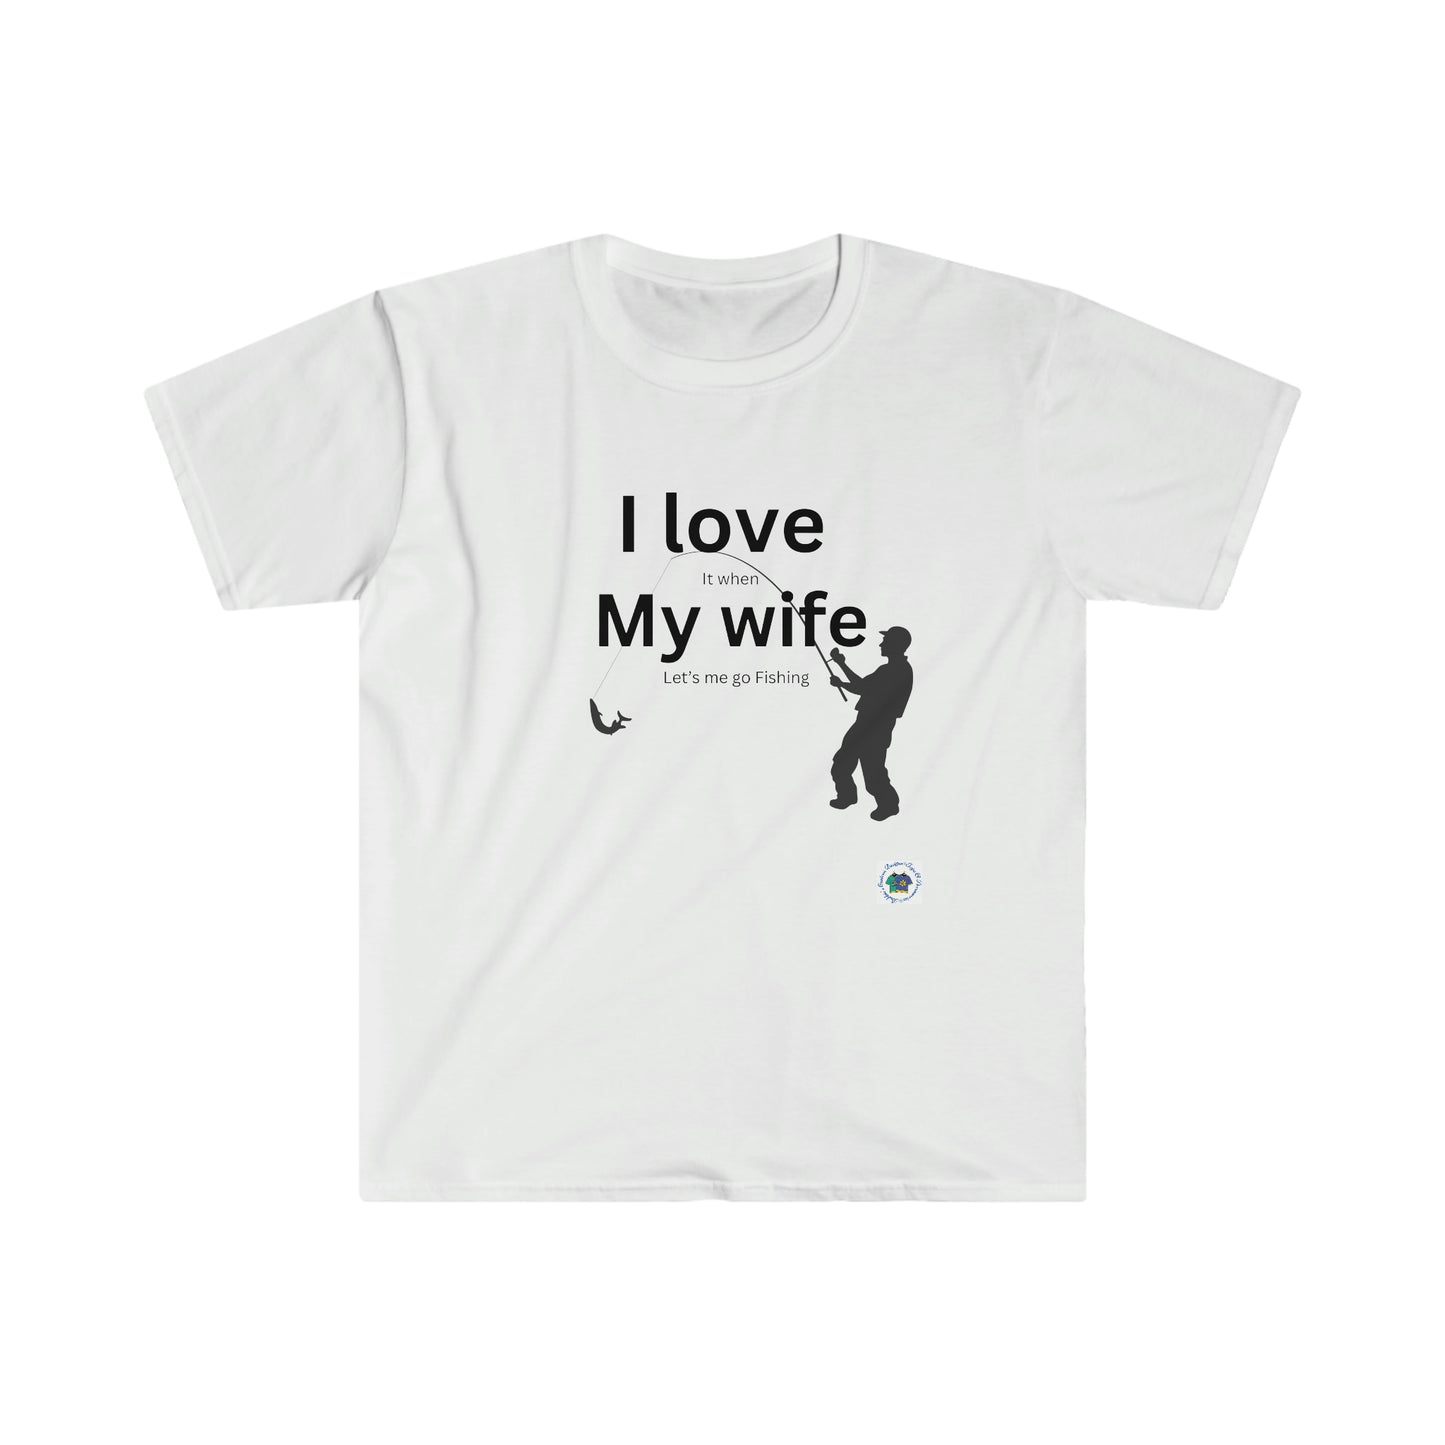 ‘I LOVE it when MY WIFE lets me go fishing’ Printed Front & Back. Unisex Softstyle T-Shirt